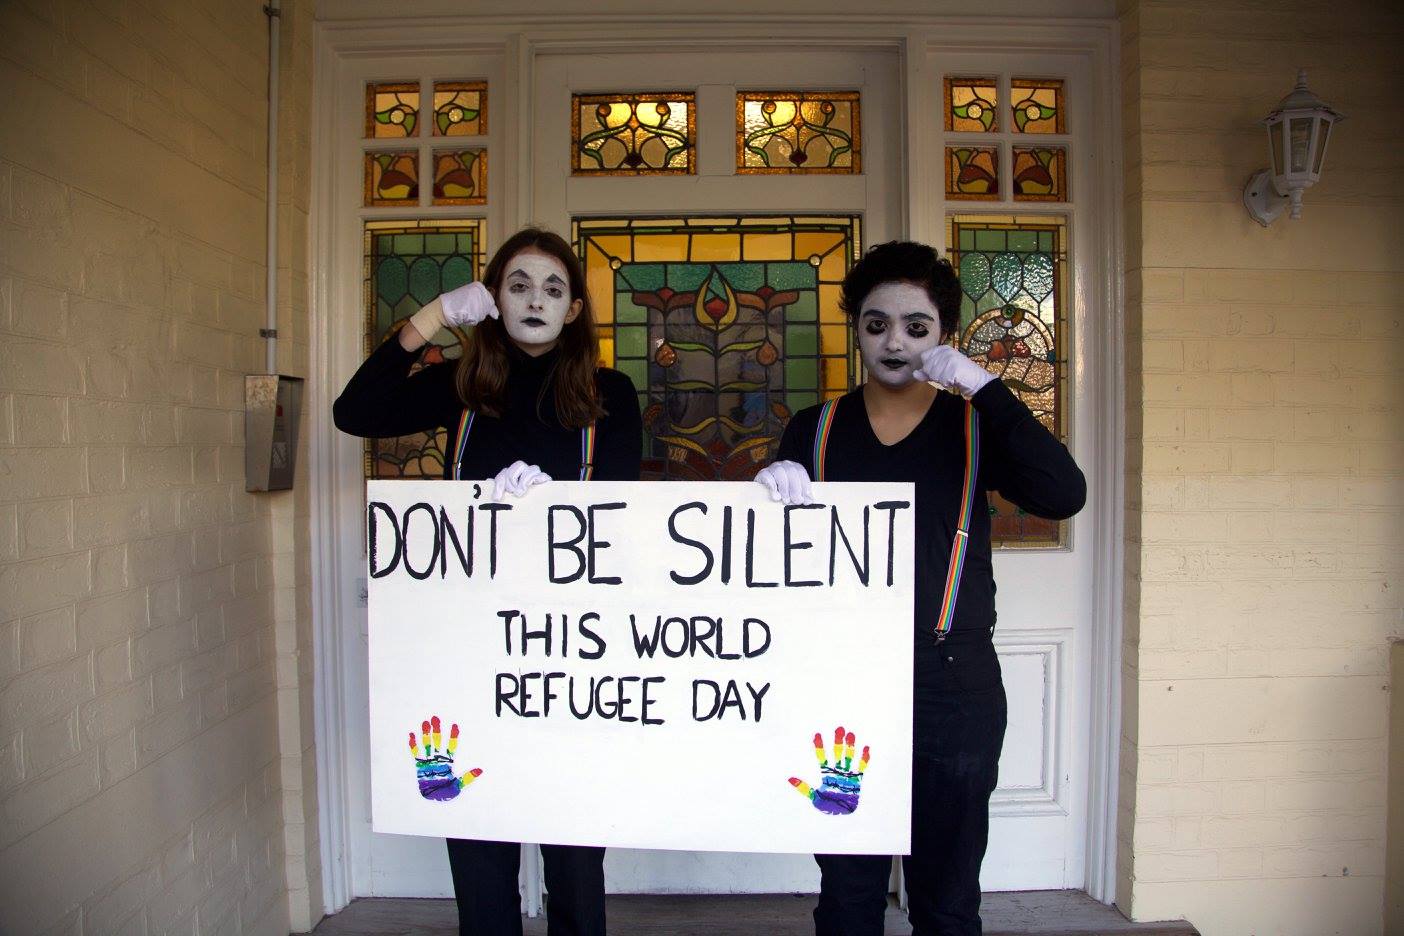 The WA Refugee and LGBTQI action groups joined forces and dressed as mimes paying visits to MP offices in Perth calling on their representatives to speak out for the protection of gender, sex and sexuality diverse refugees. Amnesty activists Isabella Houston and Patch Miller are featured in the picture.